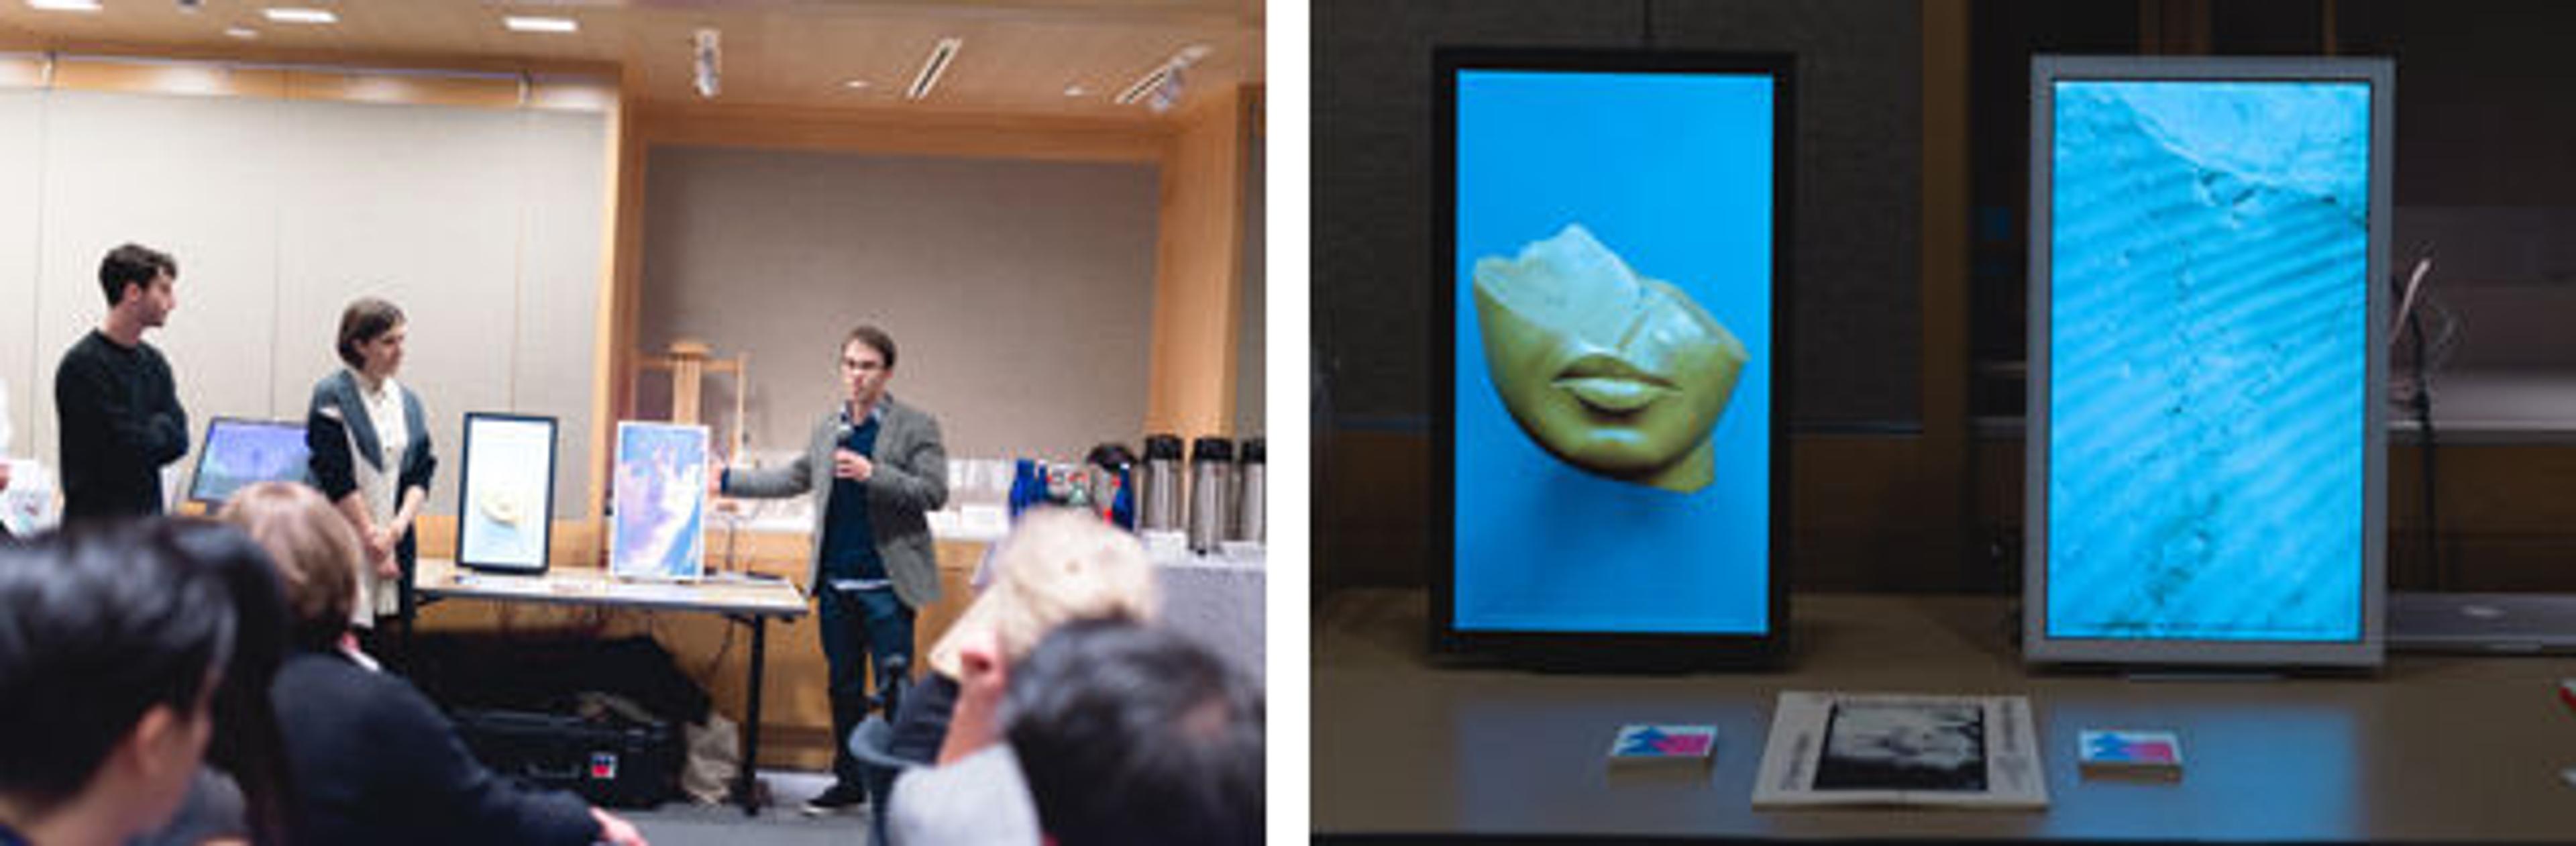 Left: Jake Levine and Zoe Salditch demonstrate the Electric Objects Digital Art Display Electric Objects' digital screen. Right: The screen is designed to display art from the internet onto your wall